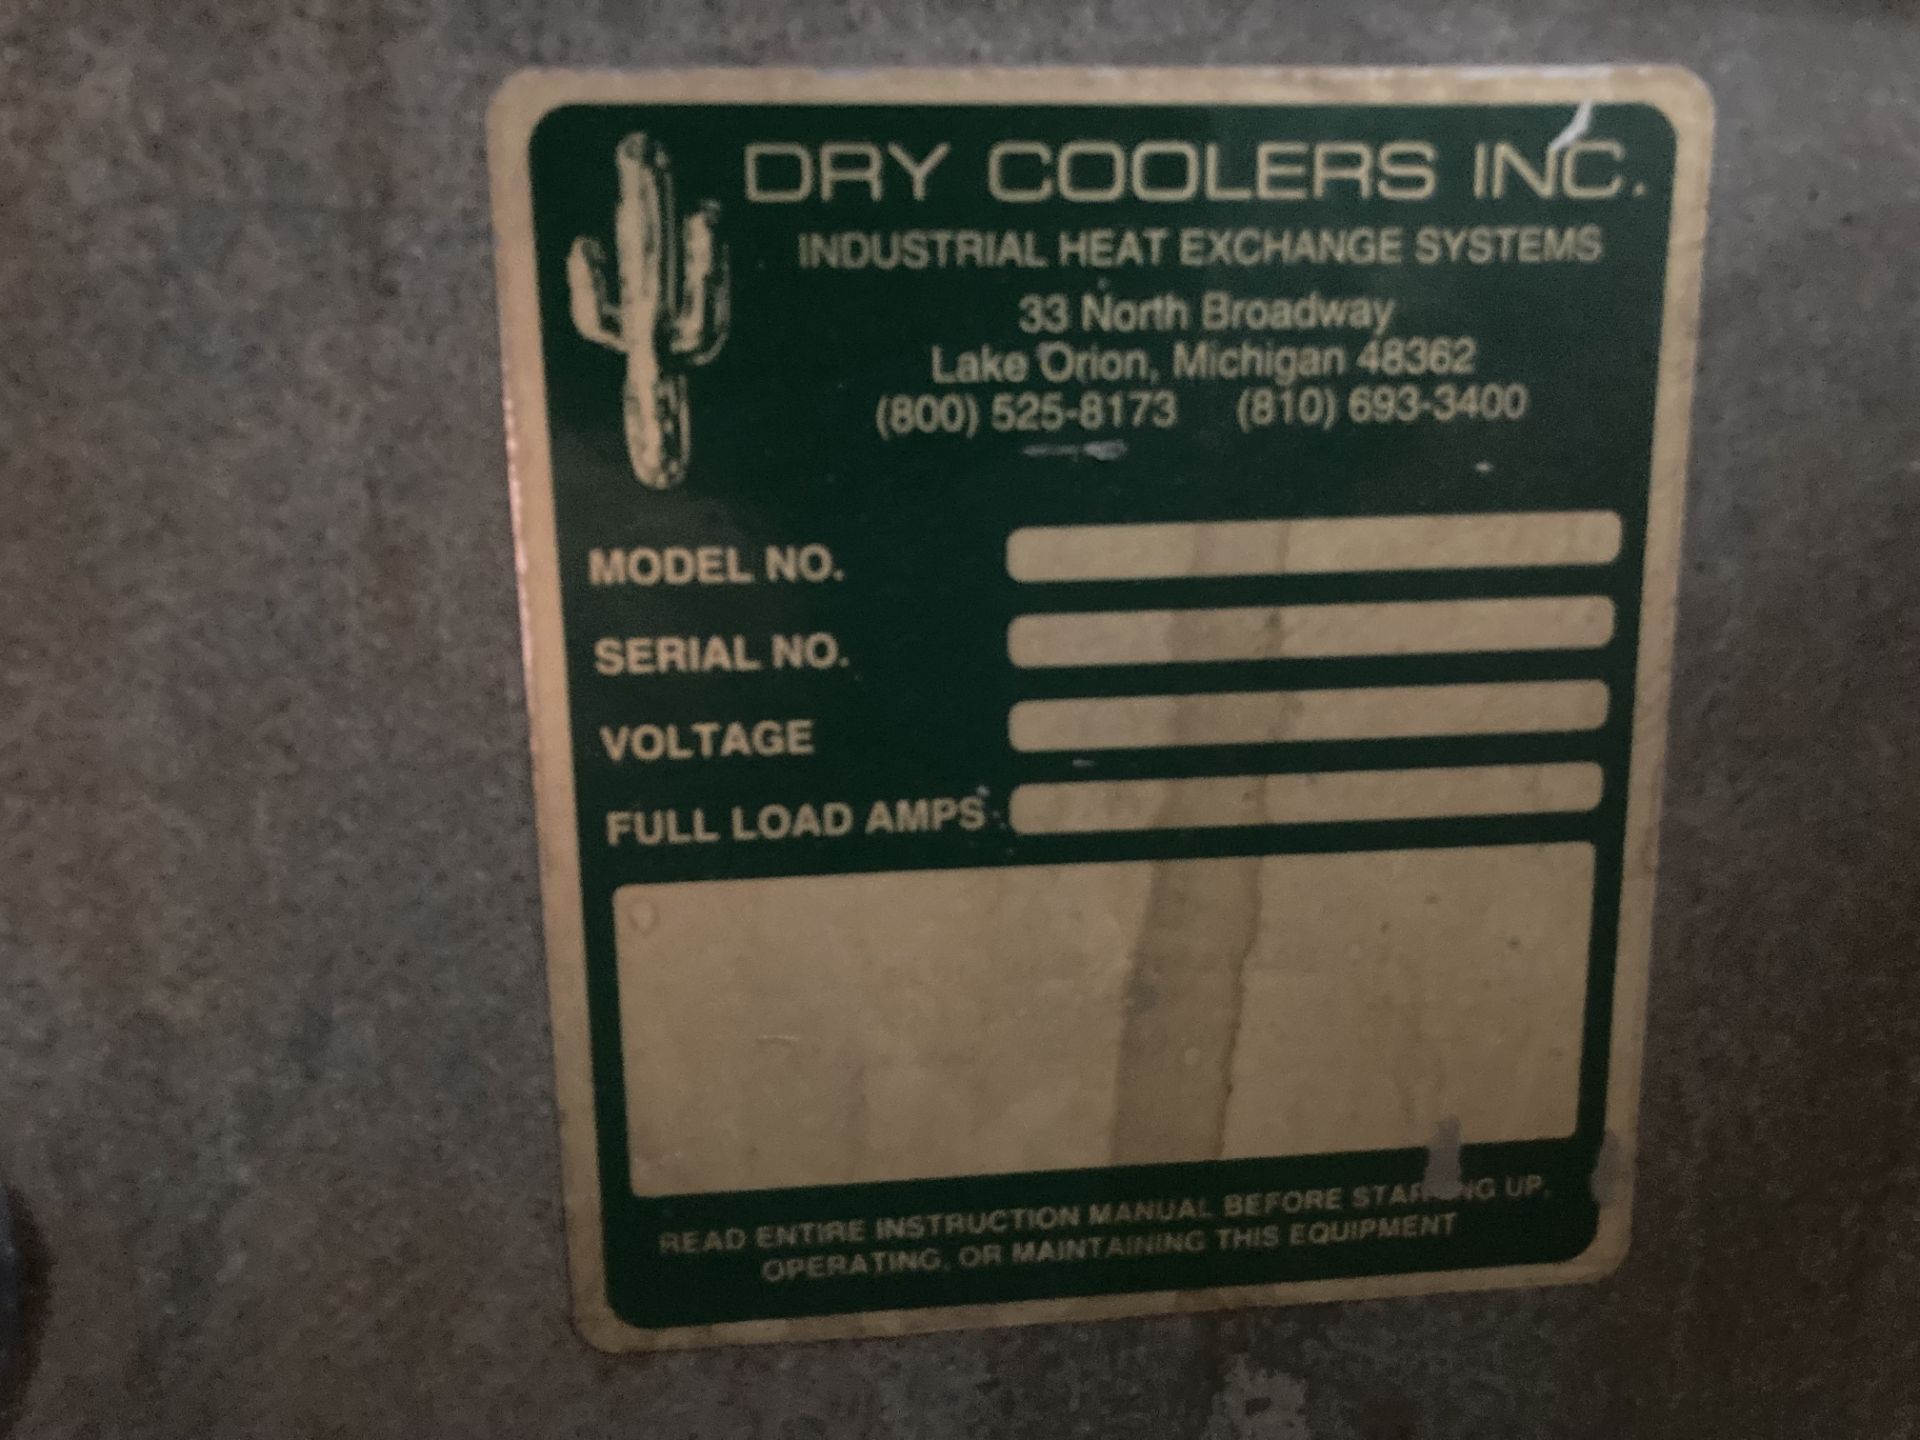 Dry Coolers Industrial Heat Exchange System - Image 6 of 6